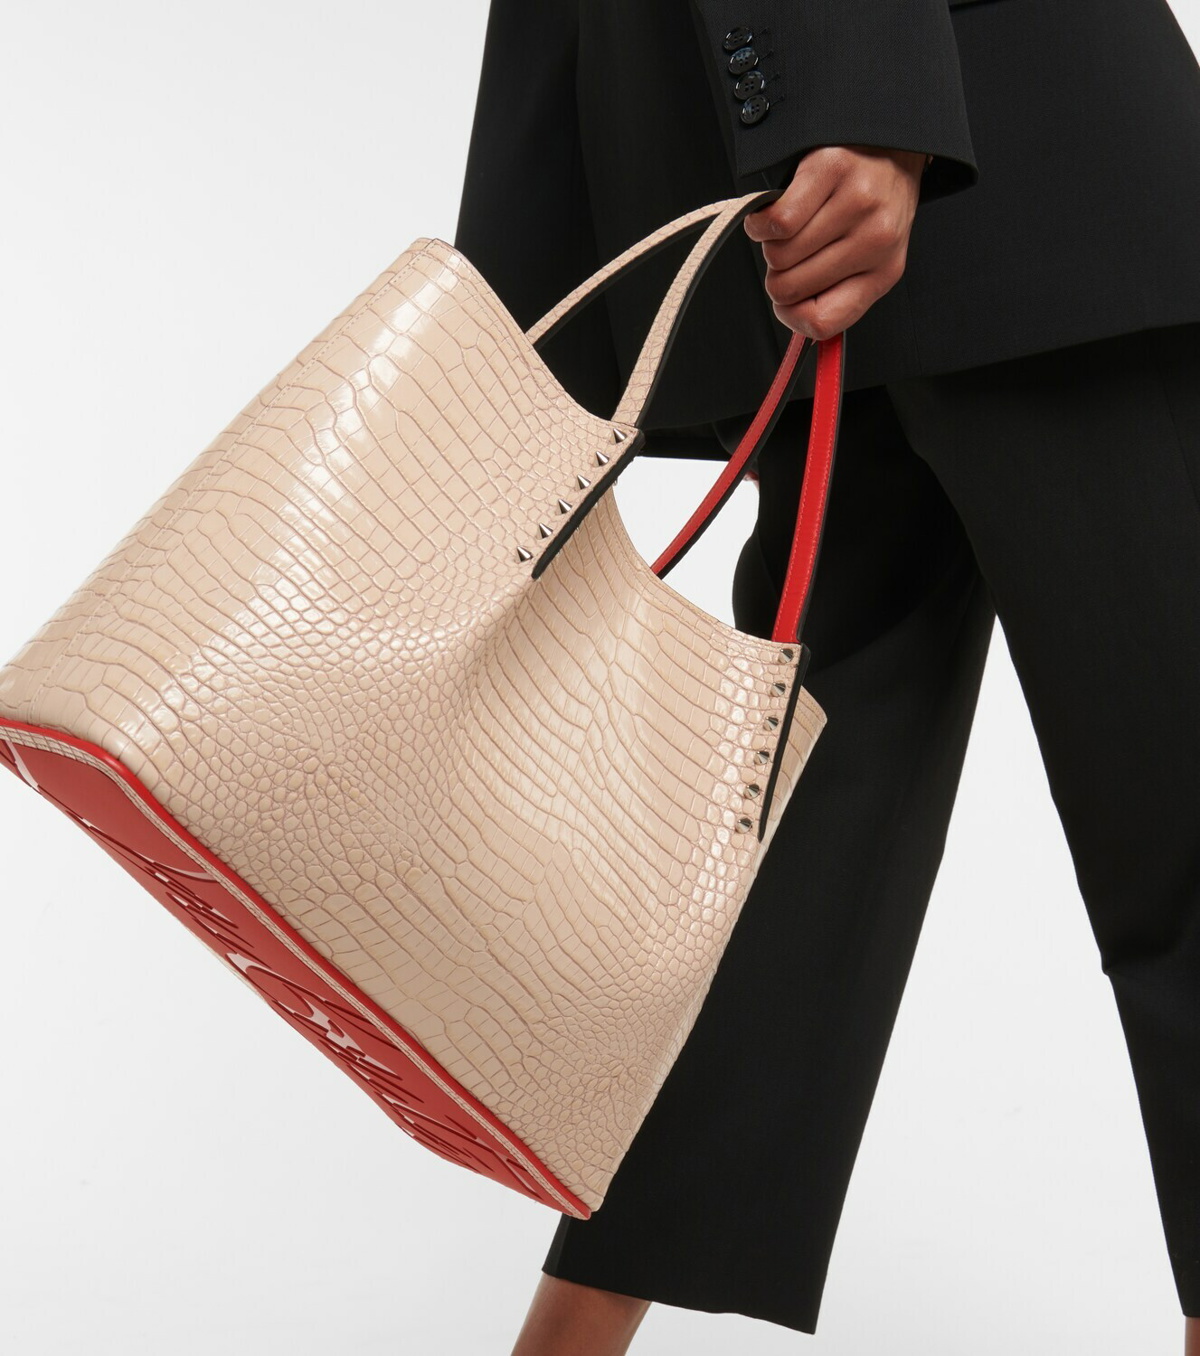 Cabarock Perforated Tote Bag in Beige - Christian Louboutin